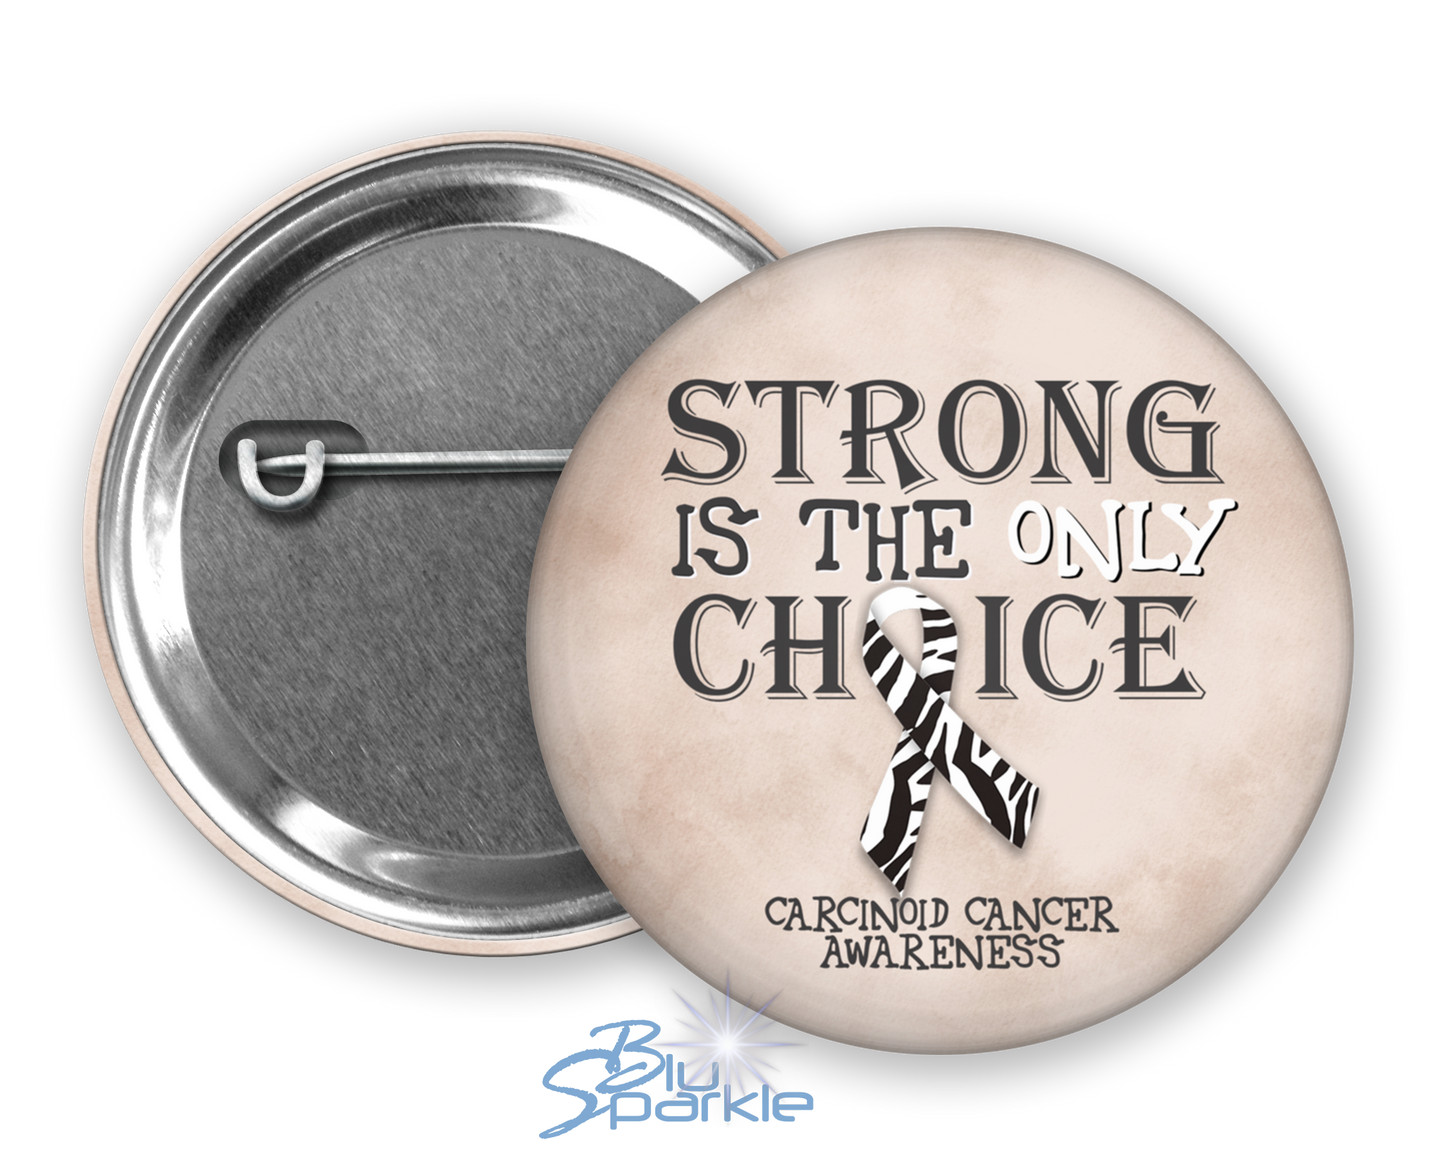 Strong is the Only Choice -Carcinoid Cancer Awareness Pinback Button